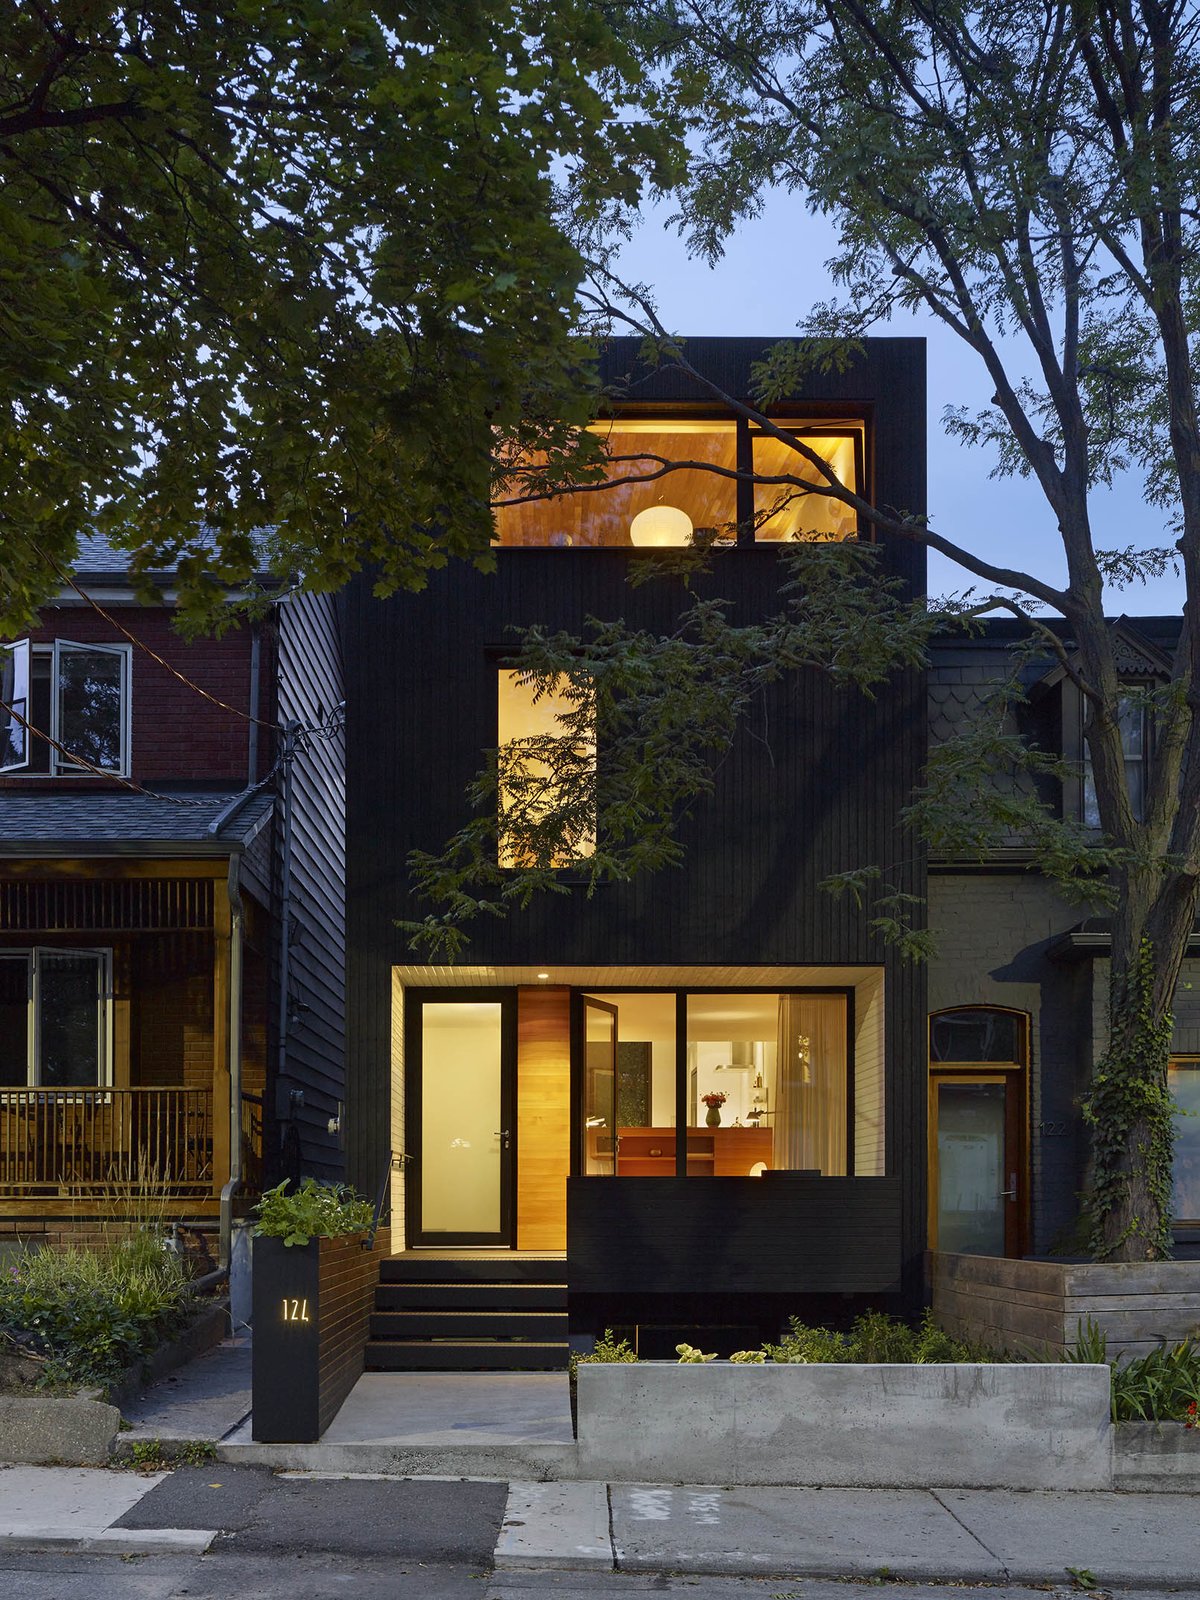 The all-black exterior cladding creates a quiet pause in the streetscape. By day, it acts as an abstract canvas for shadow play from the boulevard trees. By night, it has the quality of an austere lantern.